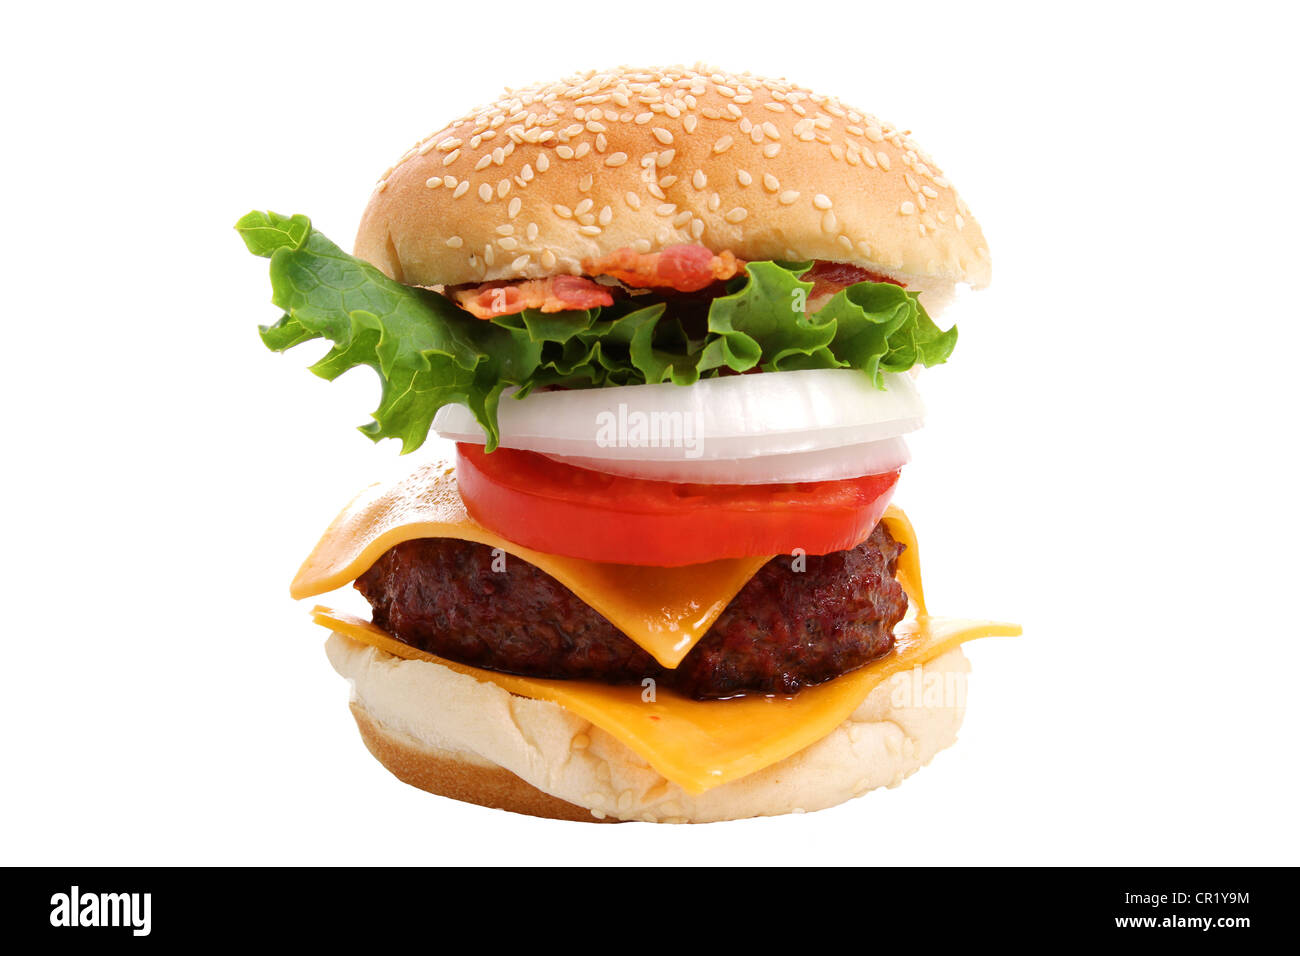 Cheeseburger with toppings set on white background Stock Photo